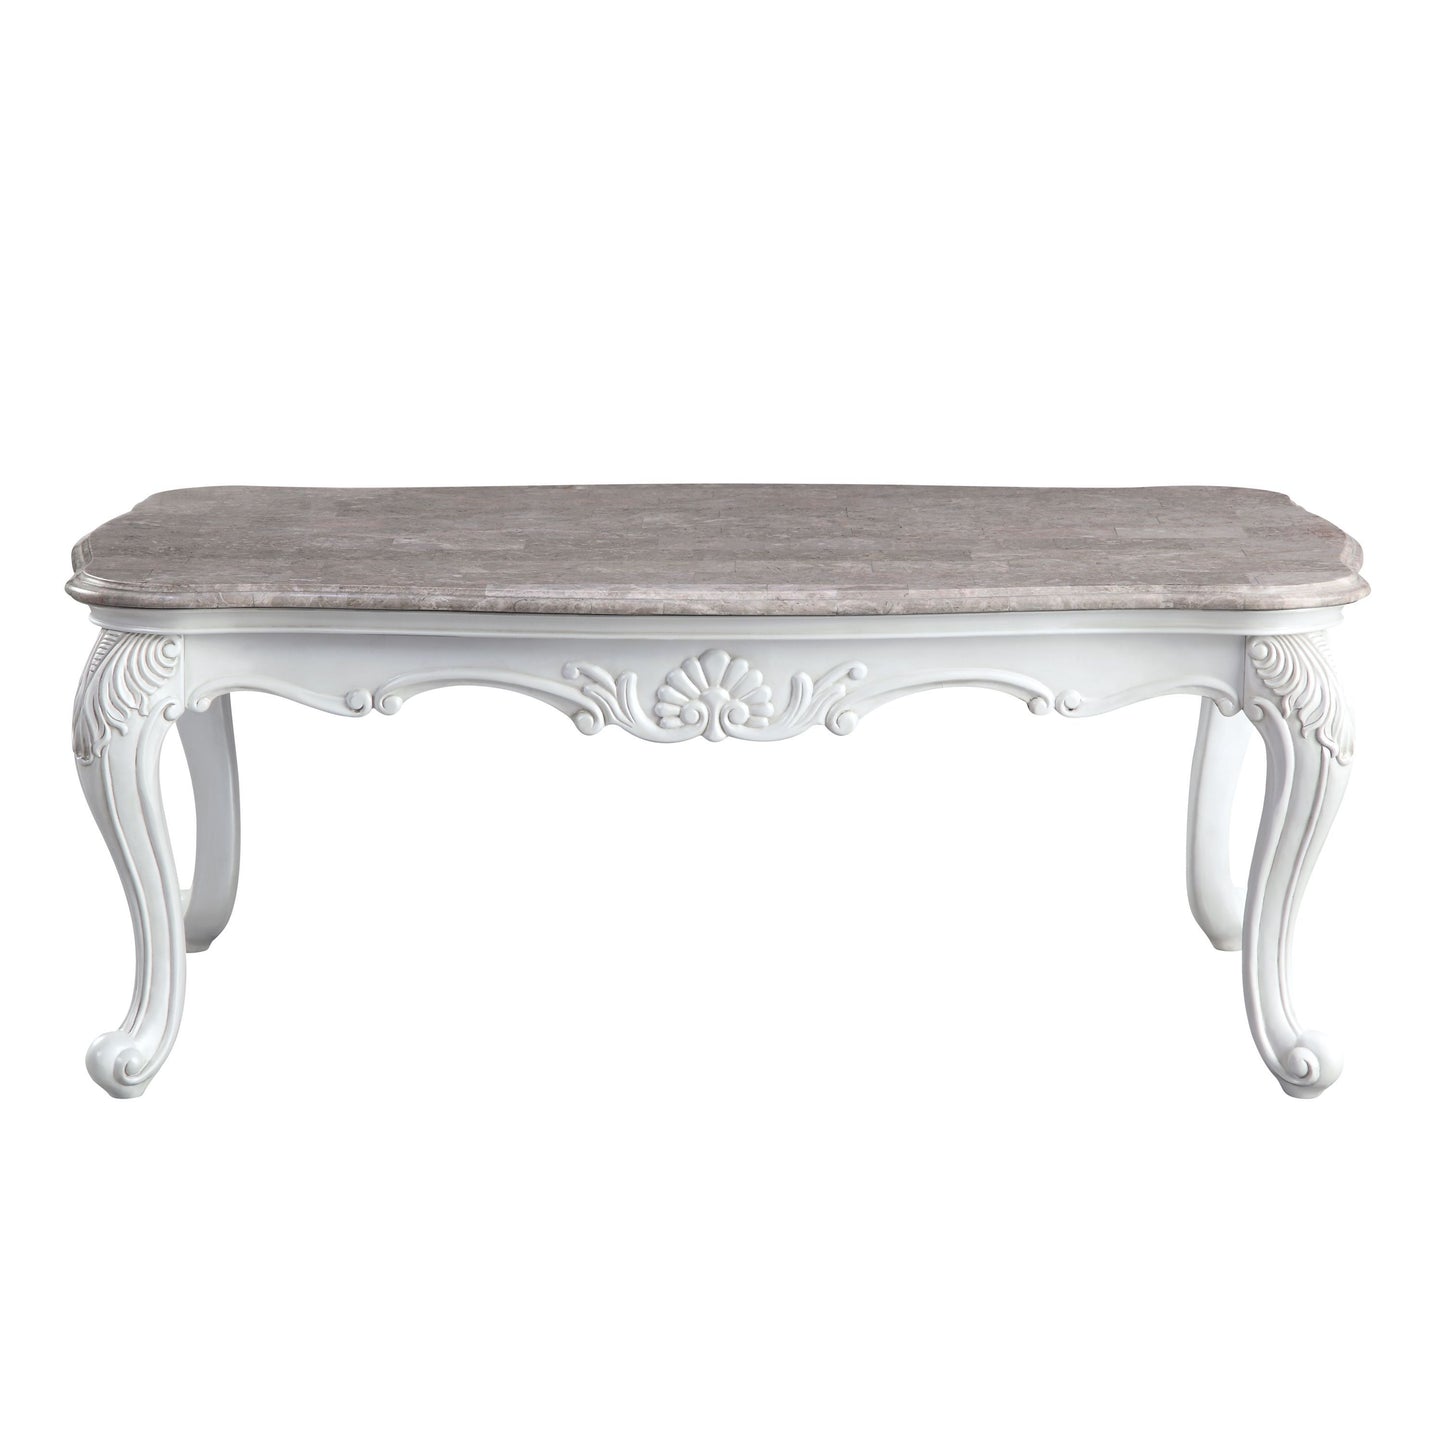 Elegant Marble Top Coffee Table in White Finish